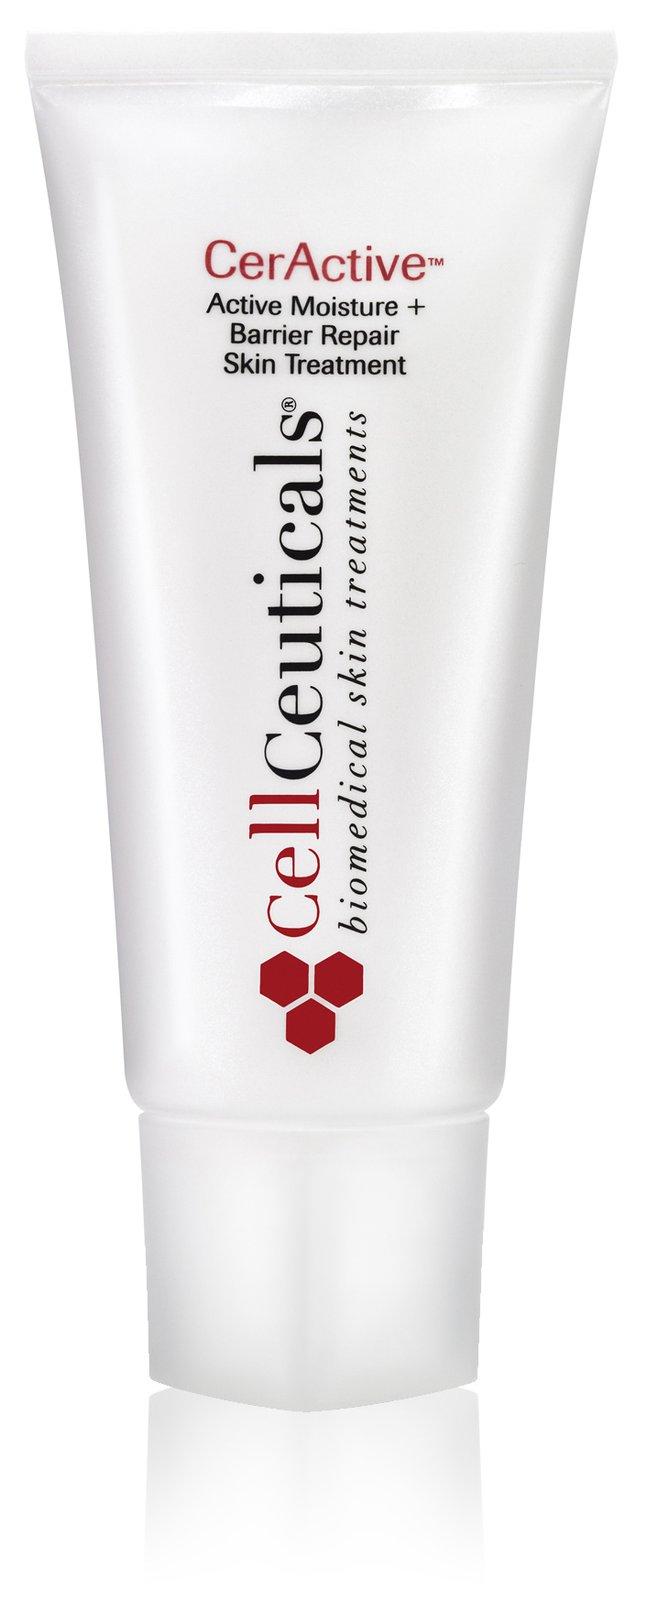 Cellceuticals Ceractive Active Moisture And Barrier Repair Skin Treatment